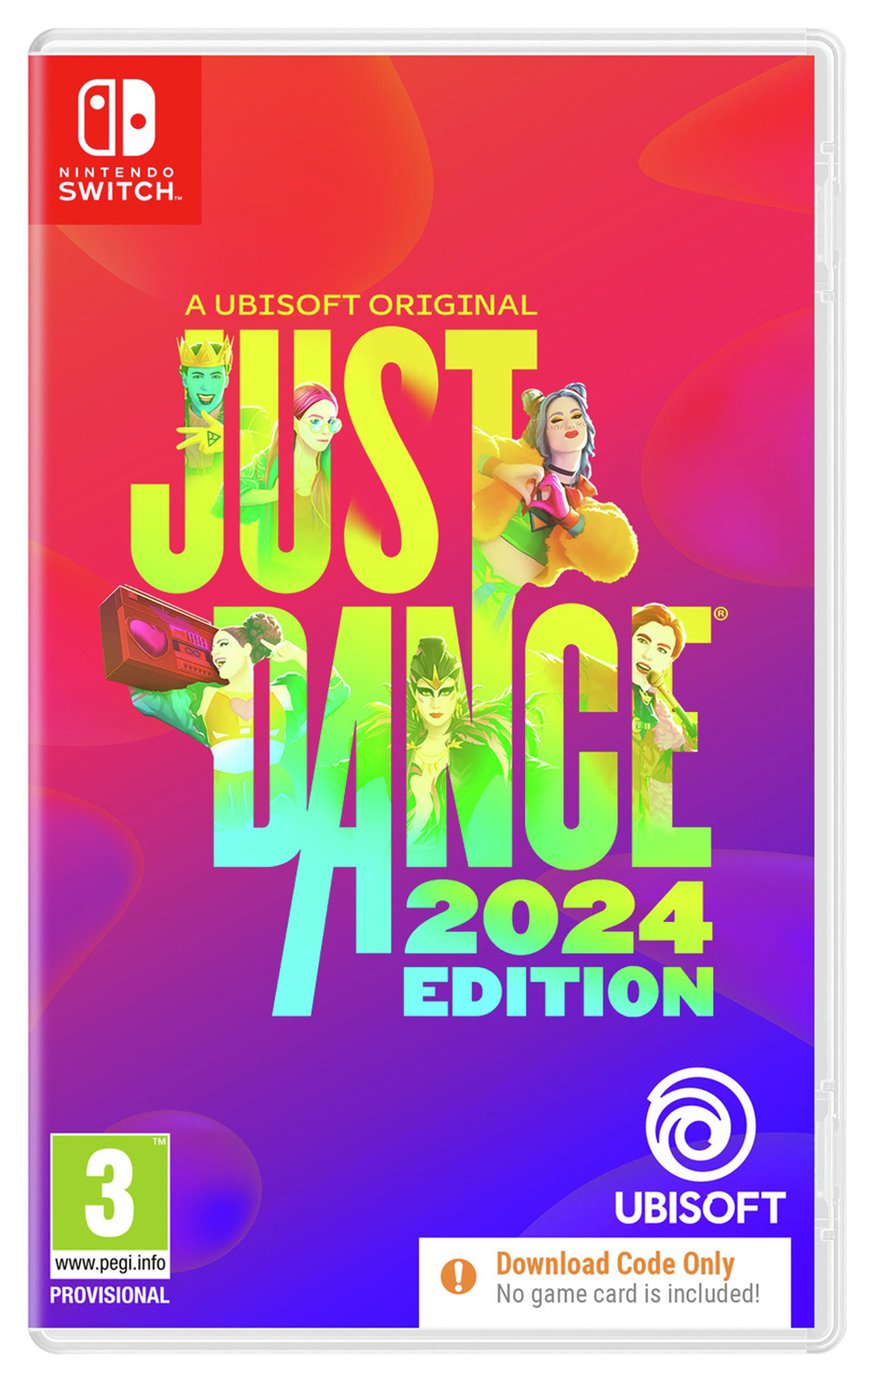 Just Dance 2024 Edition Nintendo Switch Game